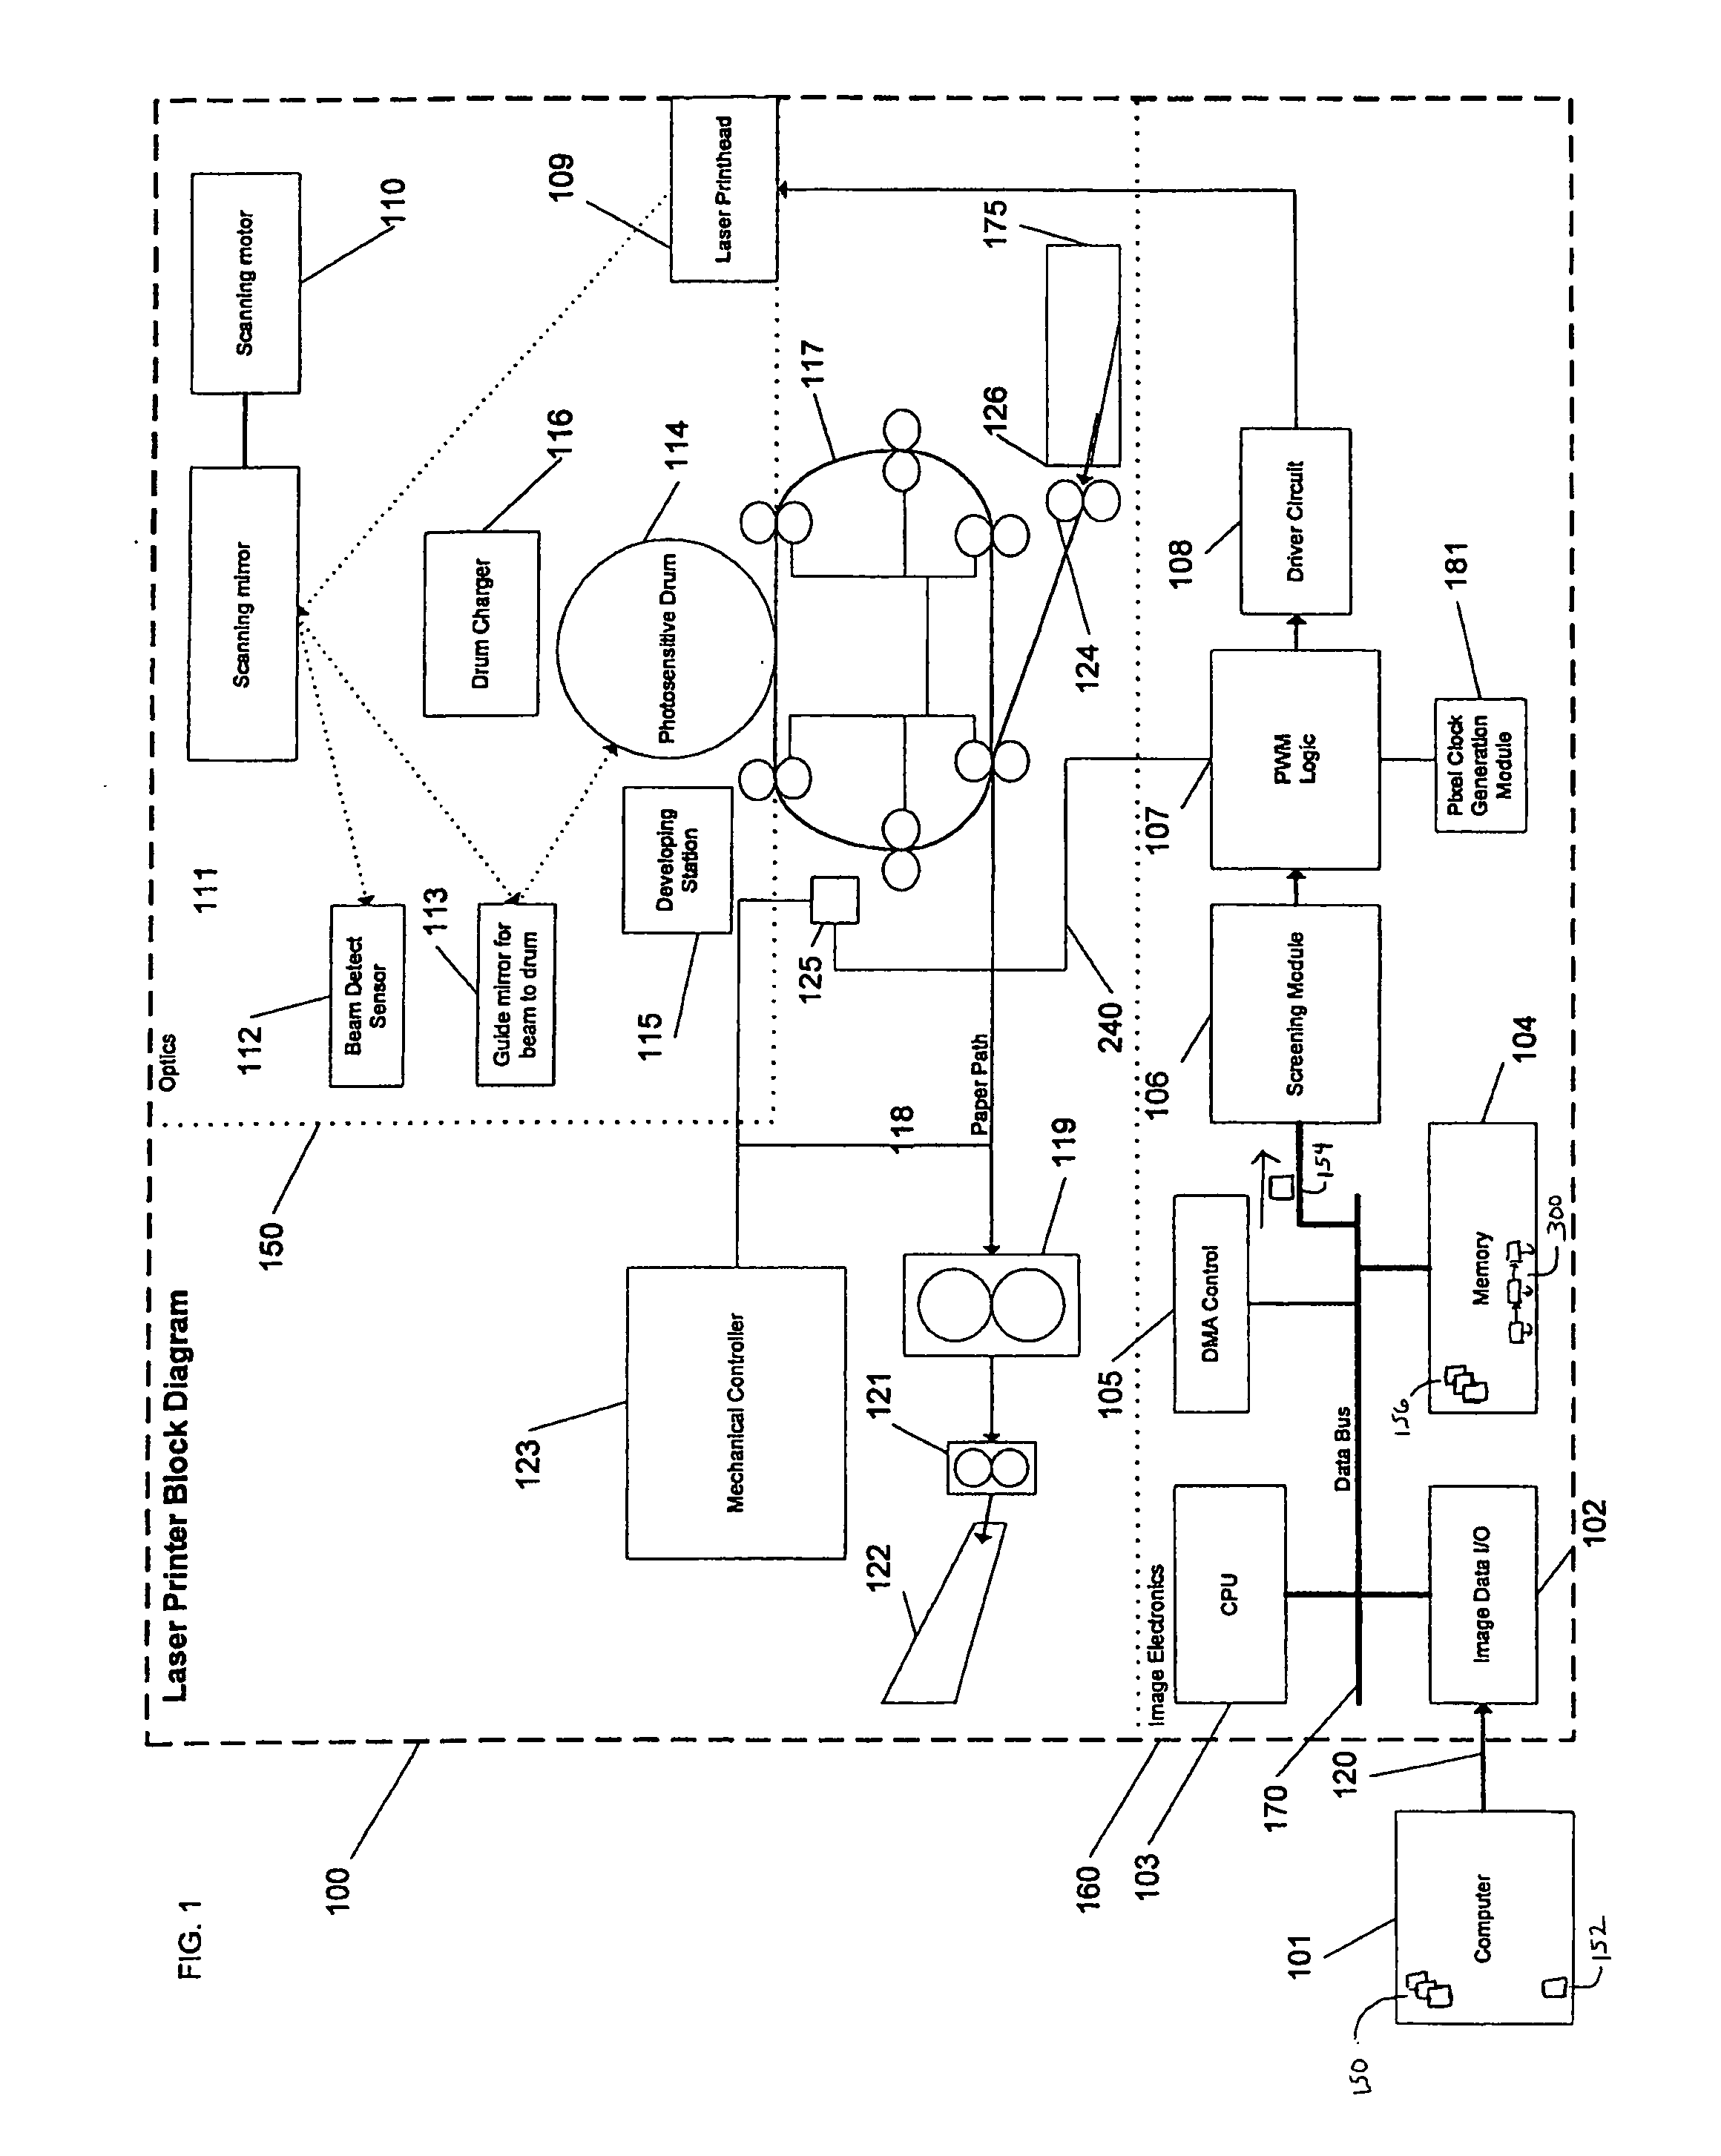 Systems and methods for loading an output profile